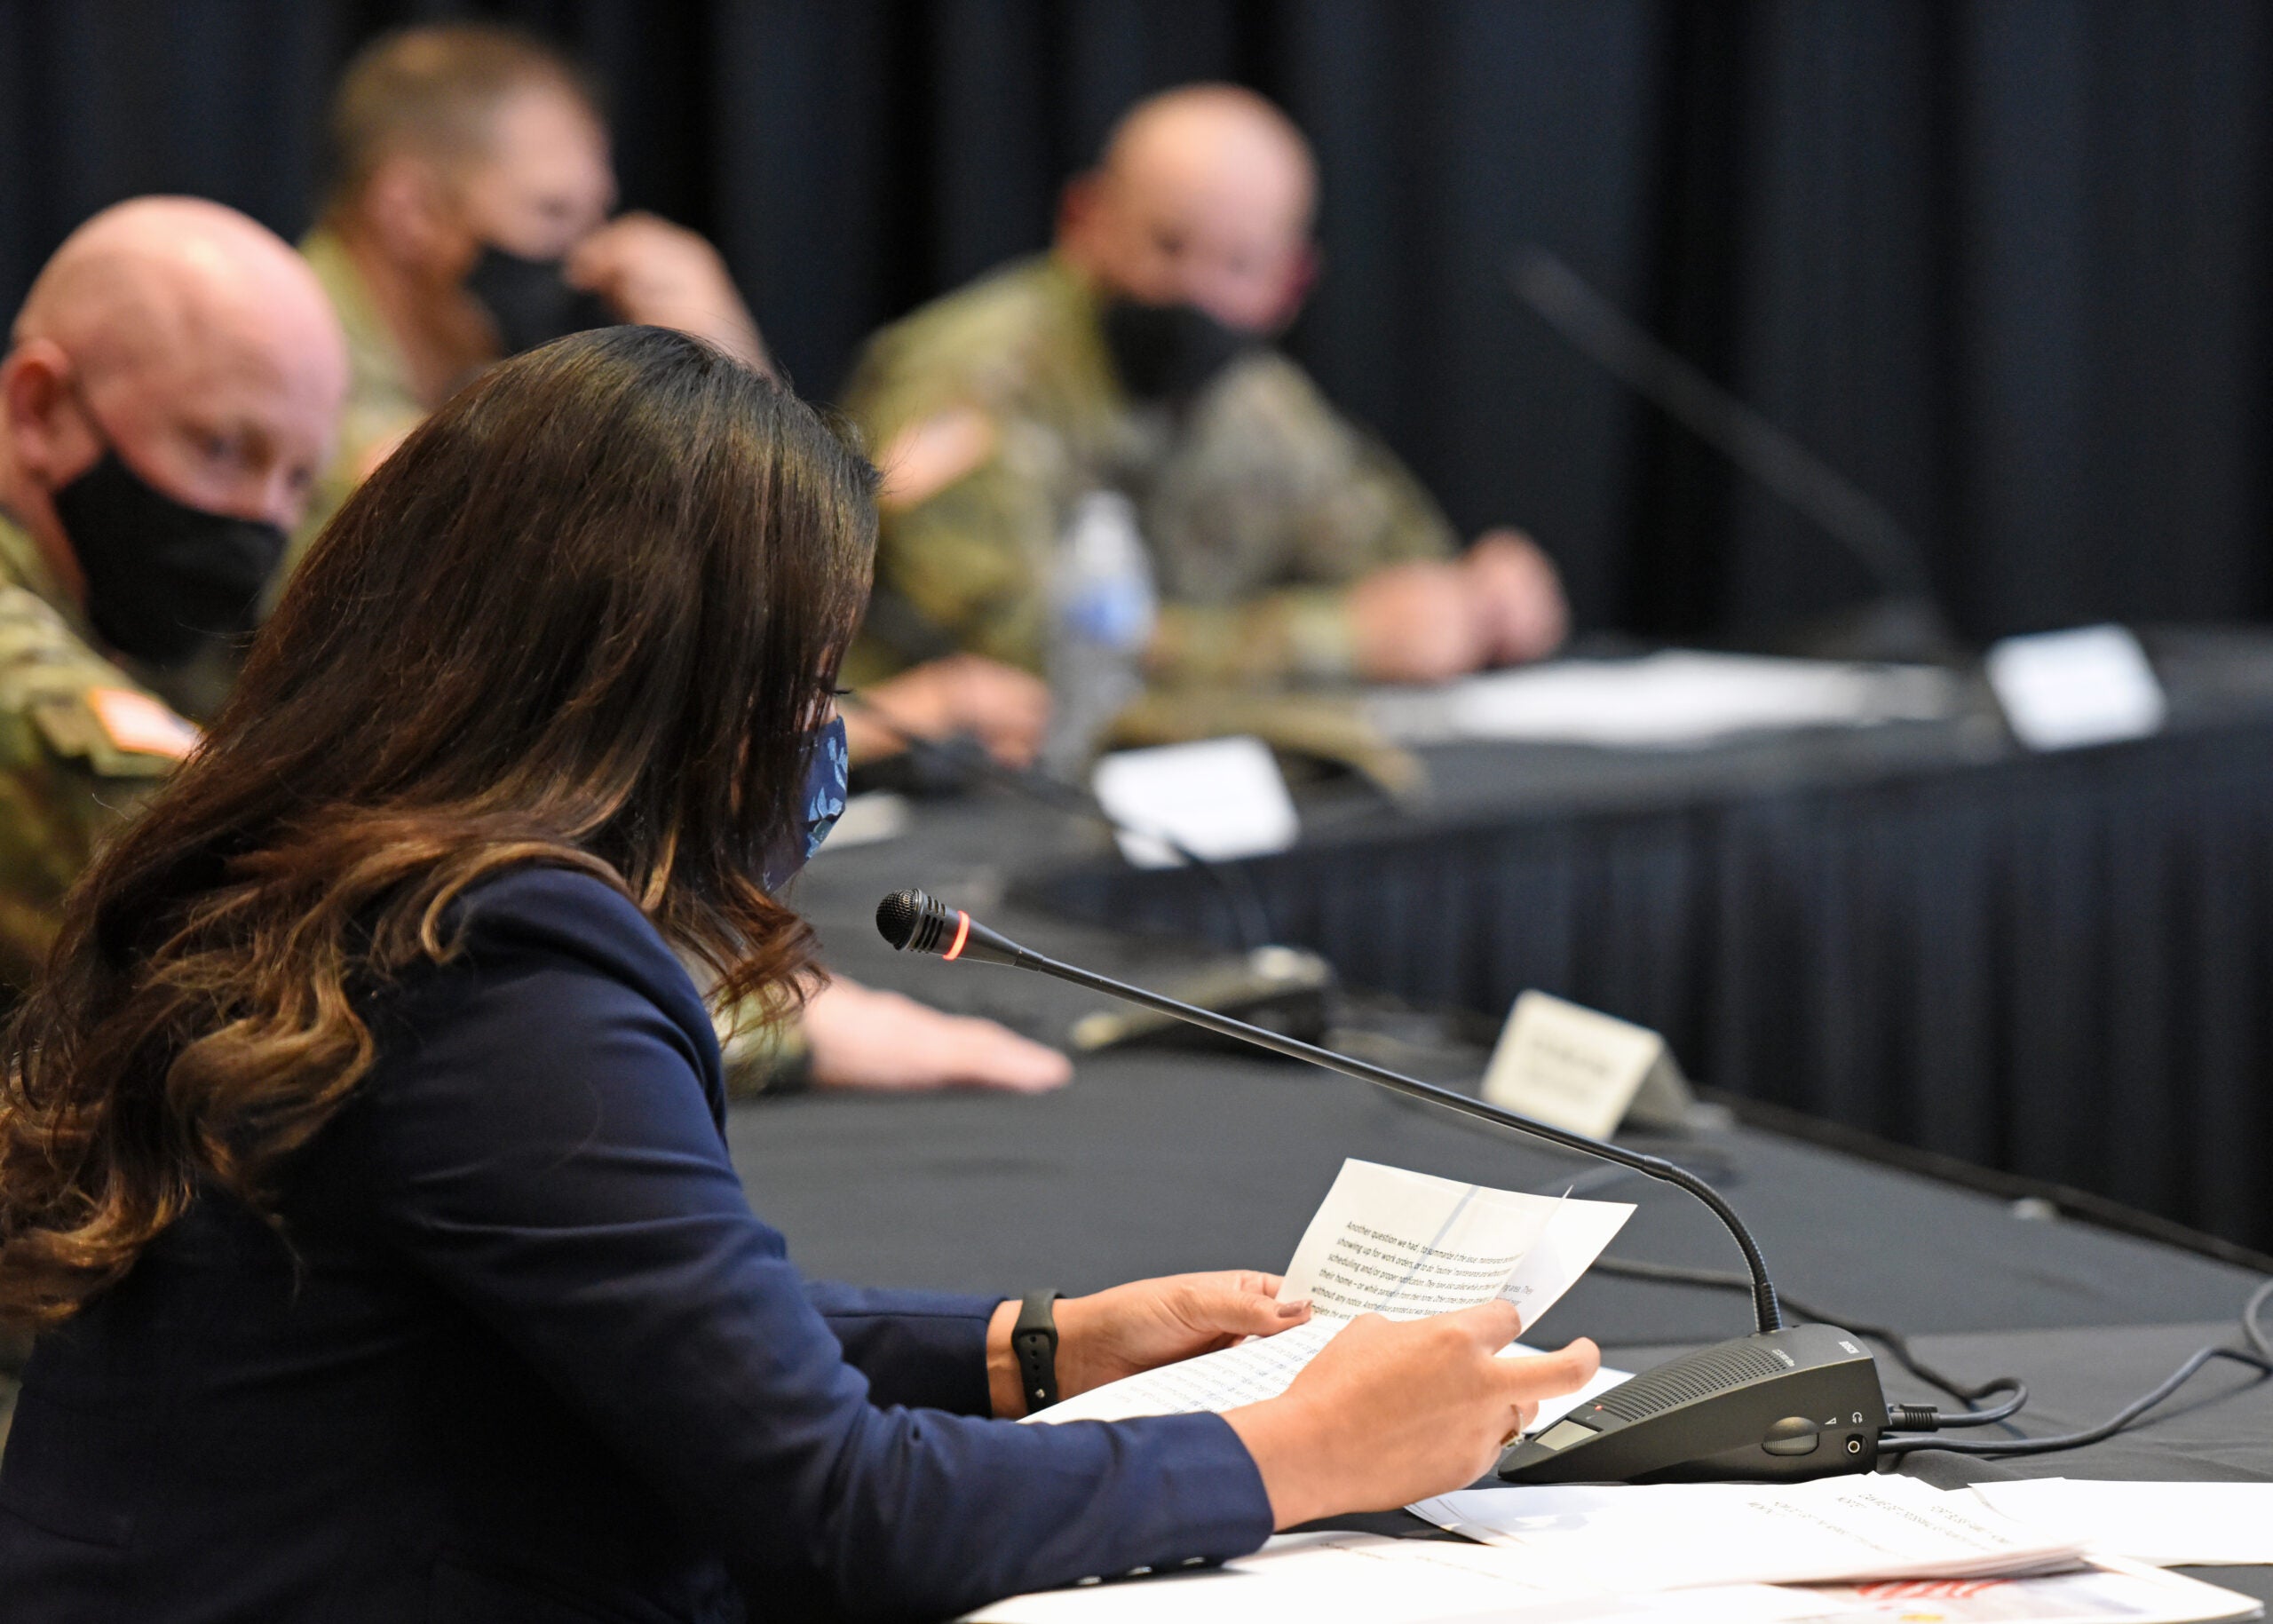 Jessica Holston, BBC community manager, addressed community questions and concerns submitted through the installation Facebook page during the quarterly town hall held Sept. 28, 2020, at Fort Bliss, Texas.